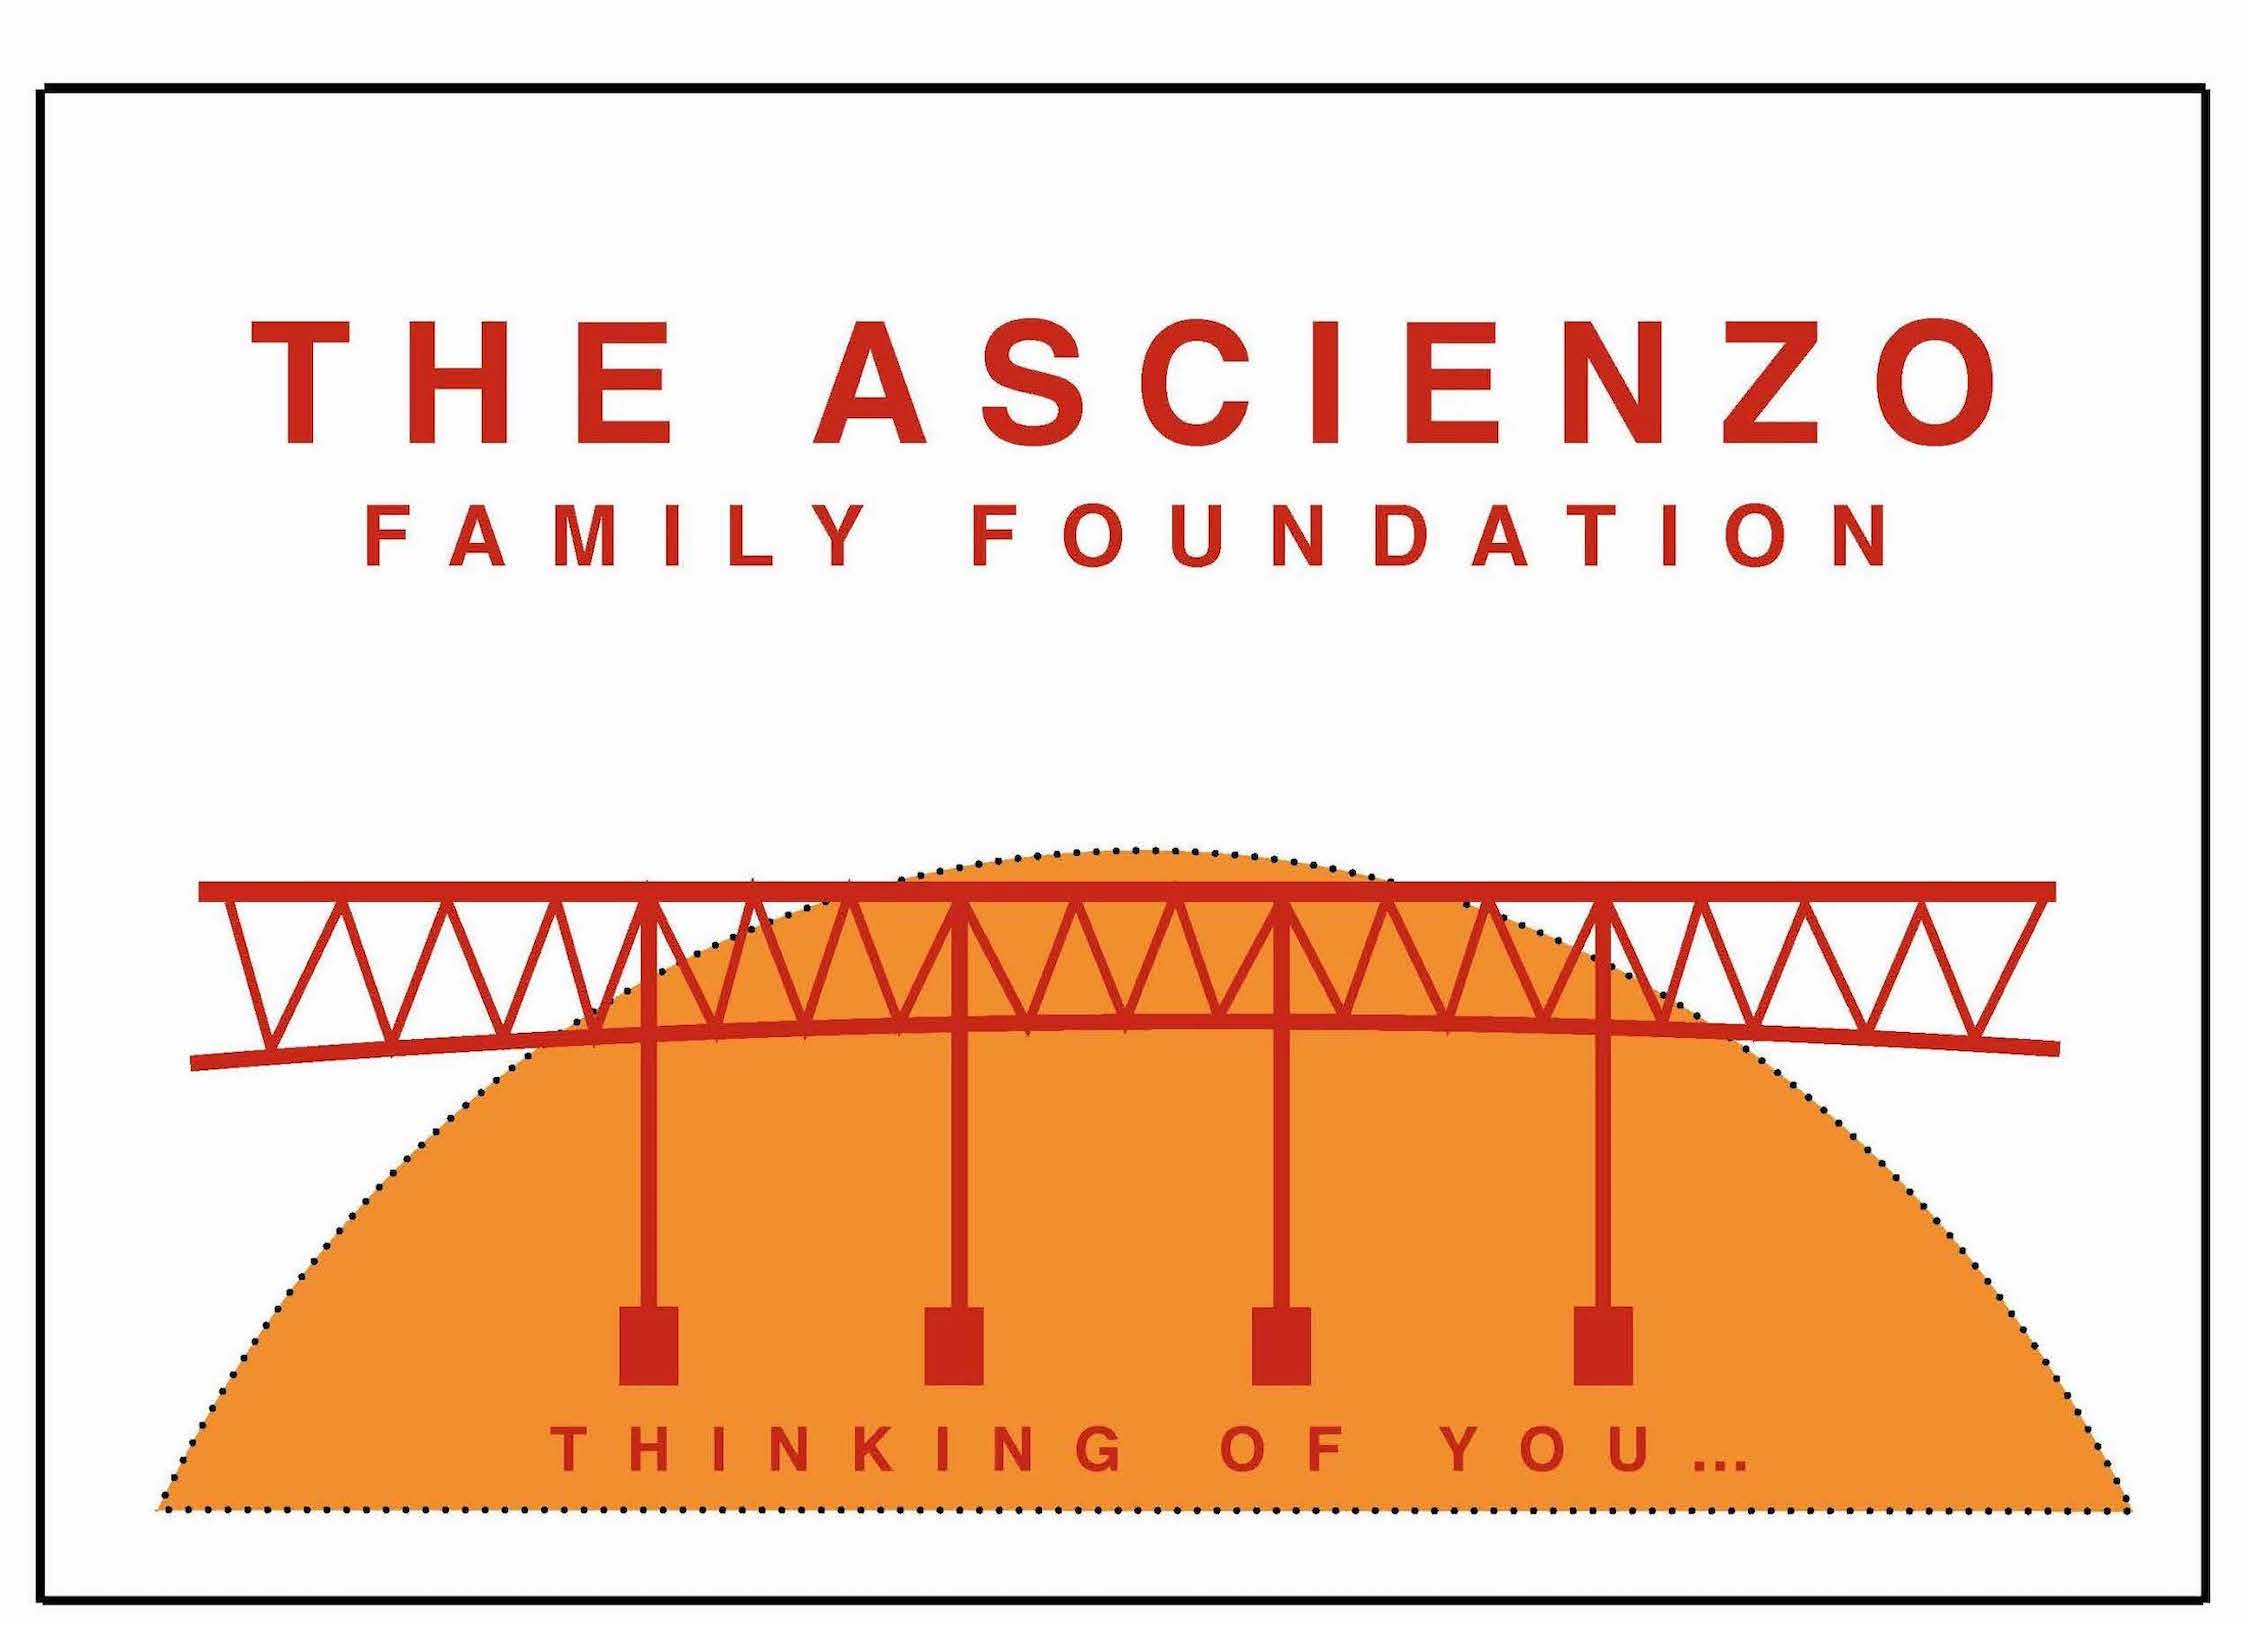 Sponsored in part by the Ascienzo Family Foundation